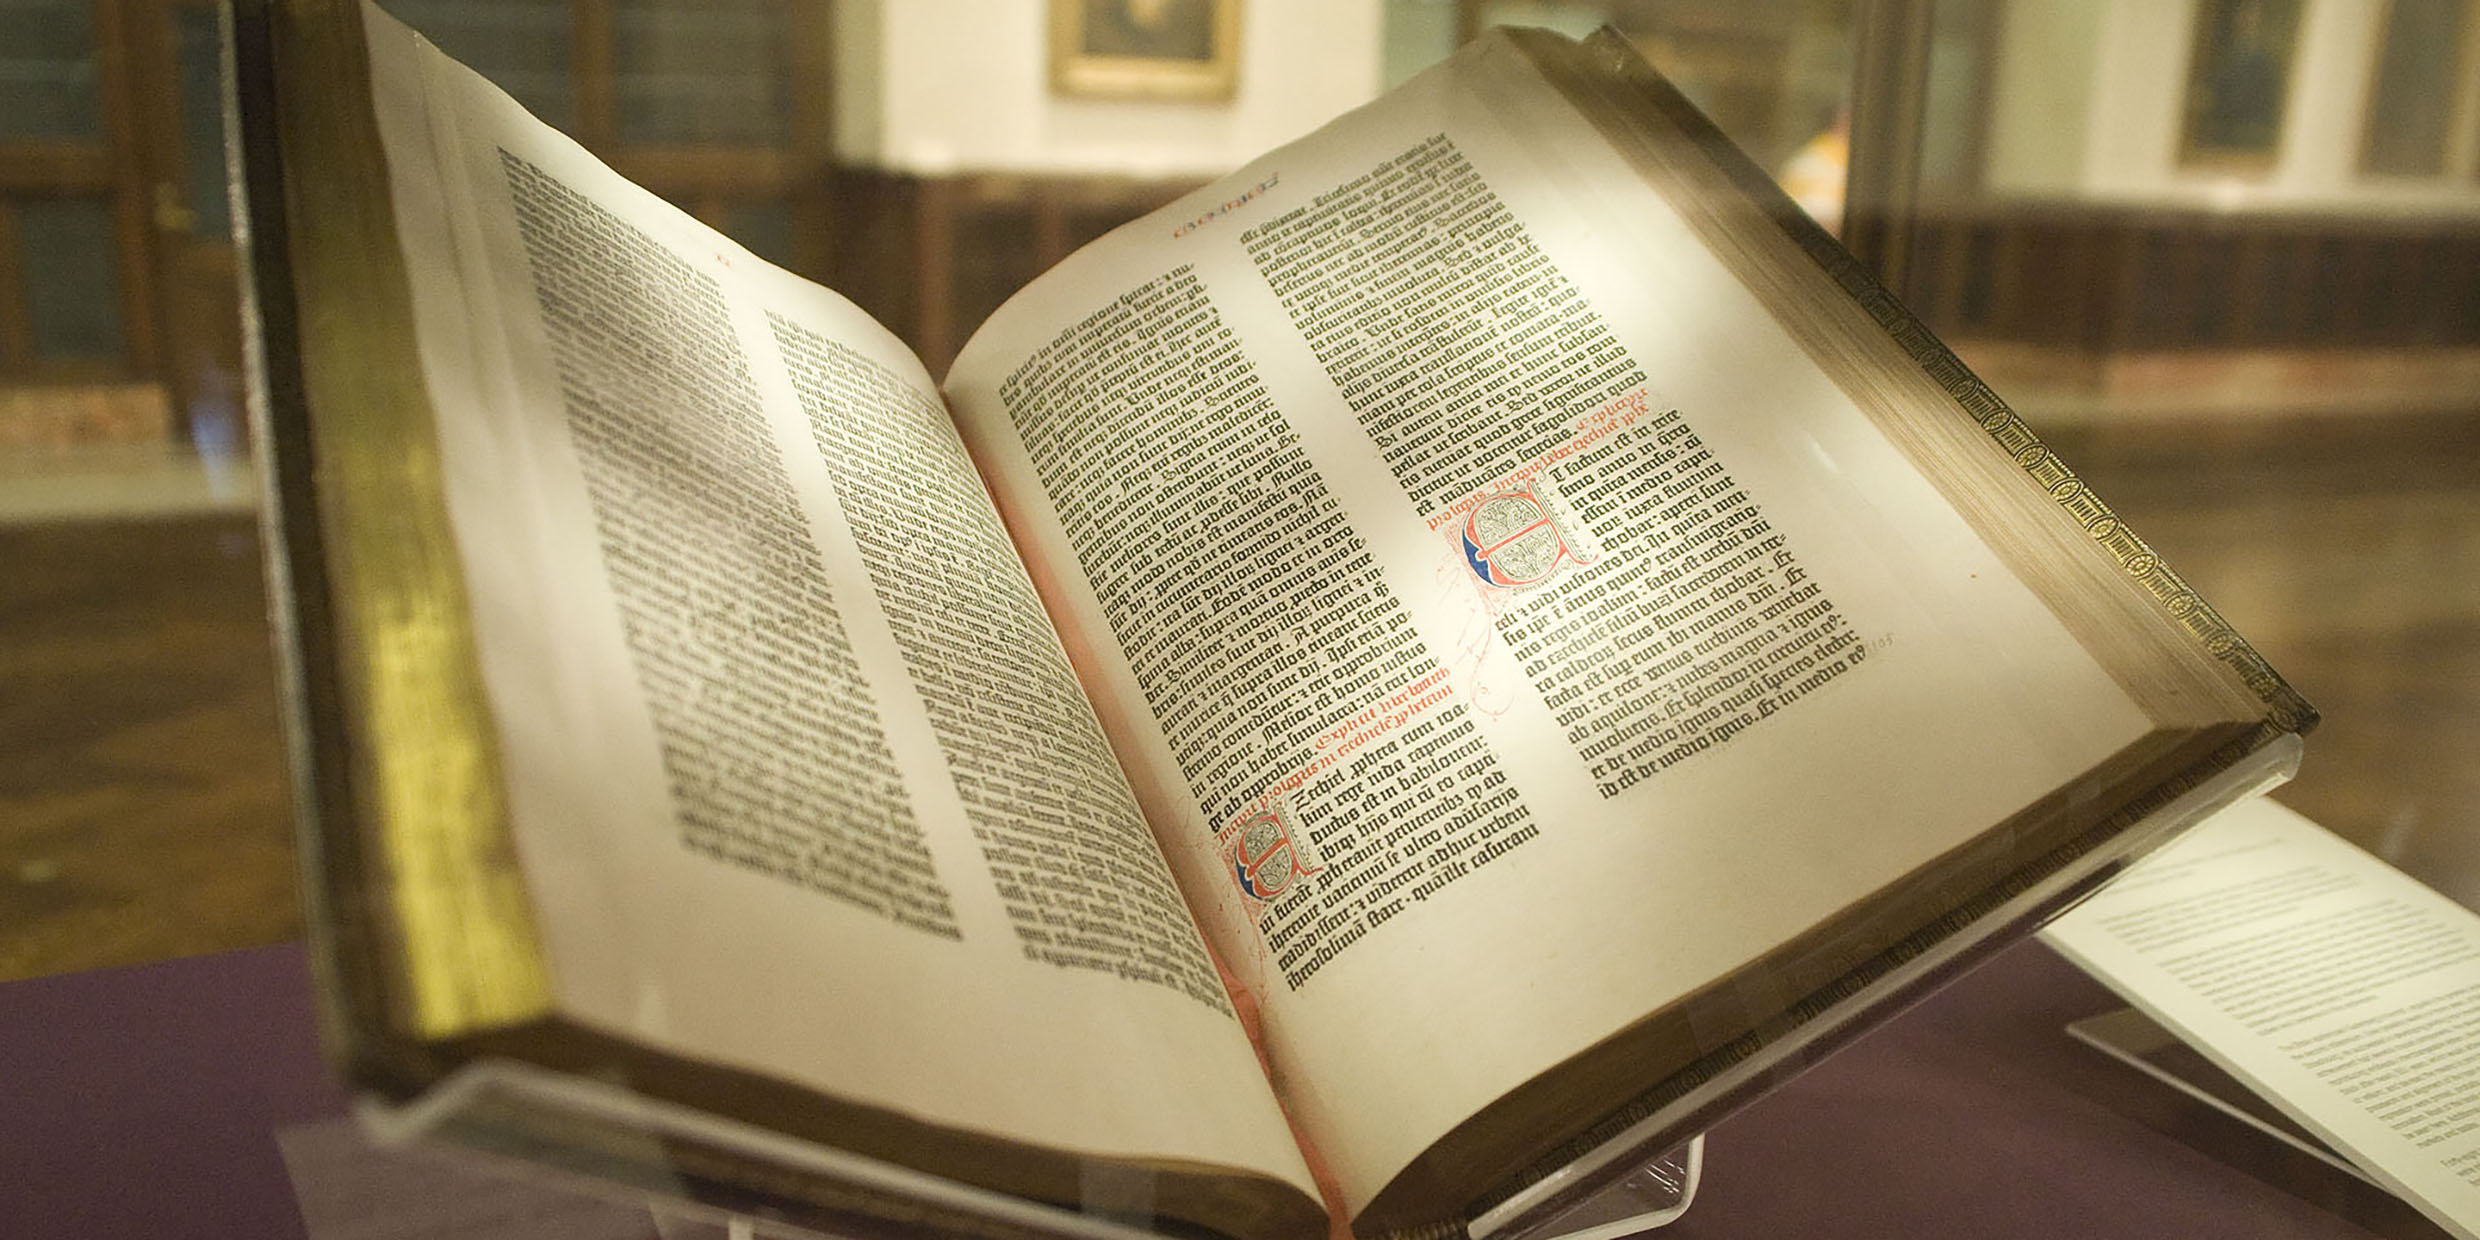 Image of a Gutenberg Bible laying open in a display case